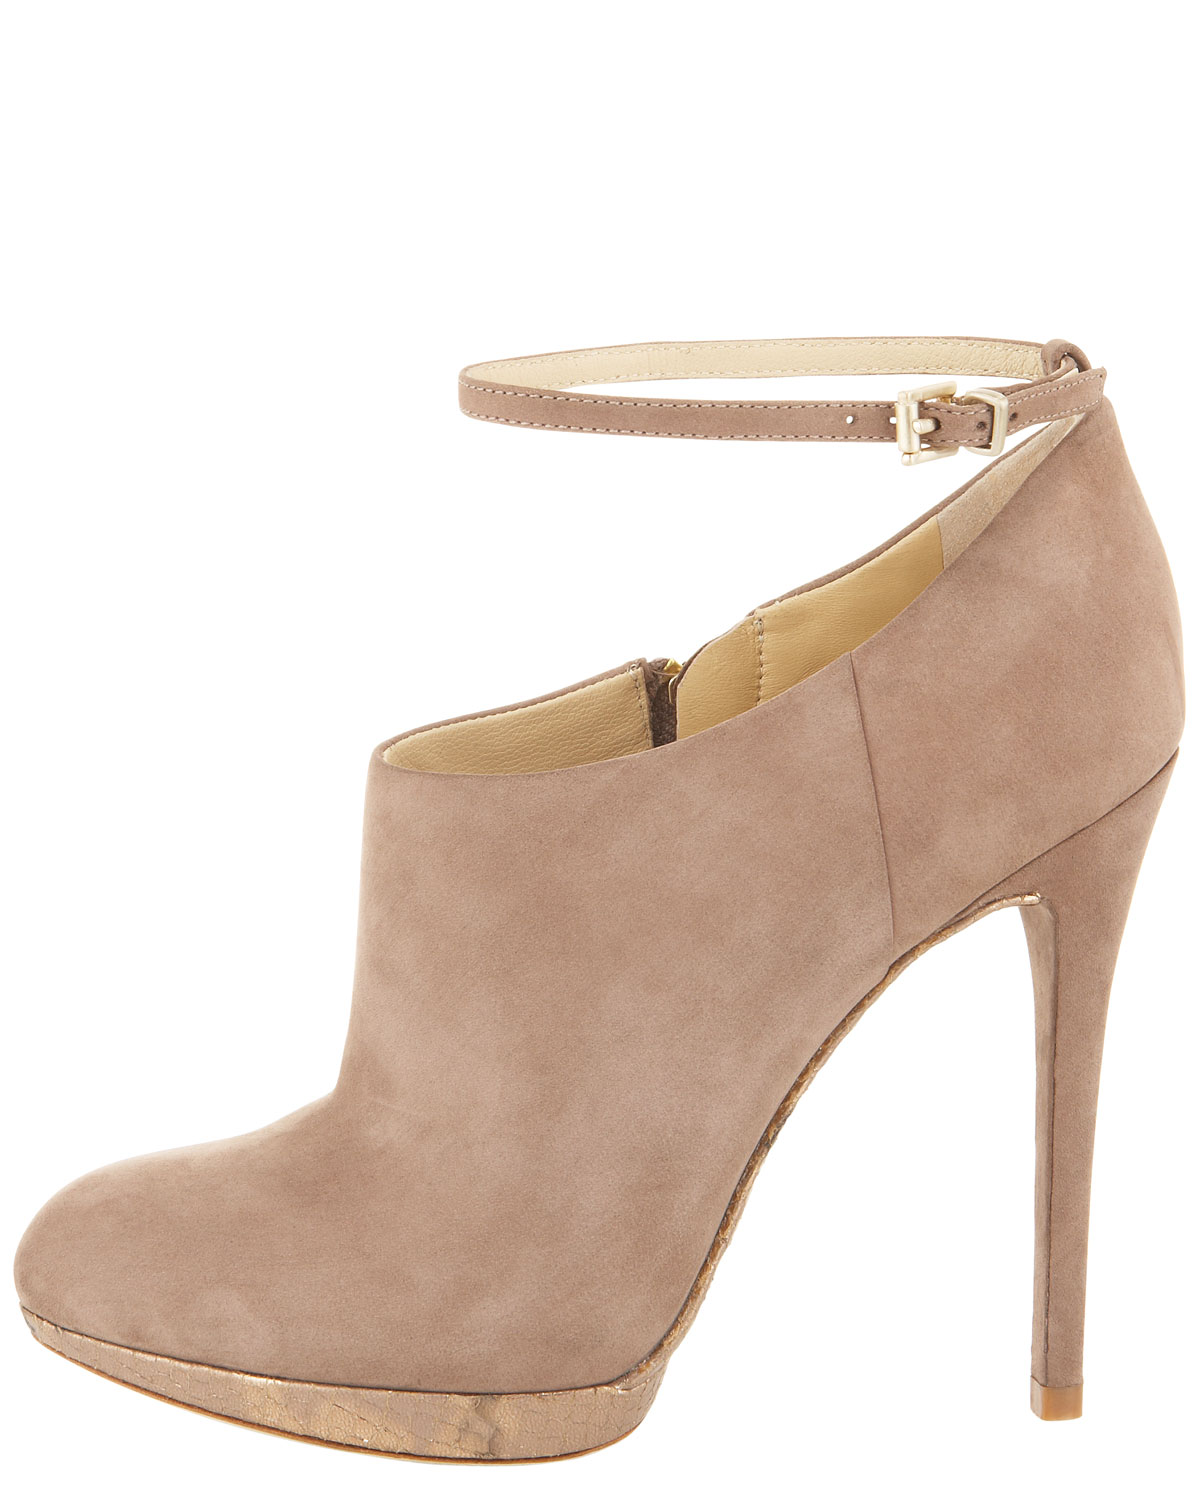 B brian atwood Snakesole Ankle Bootie in Natural | Lyst